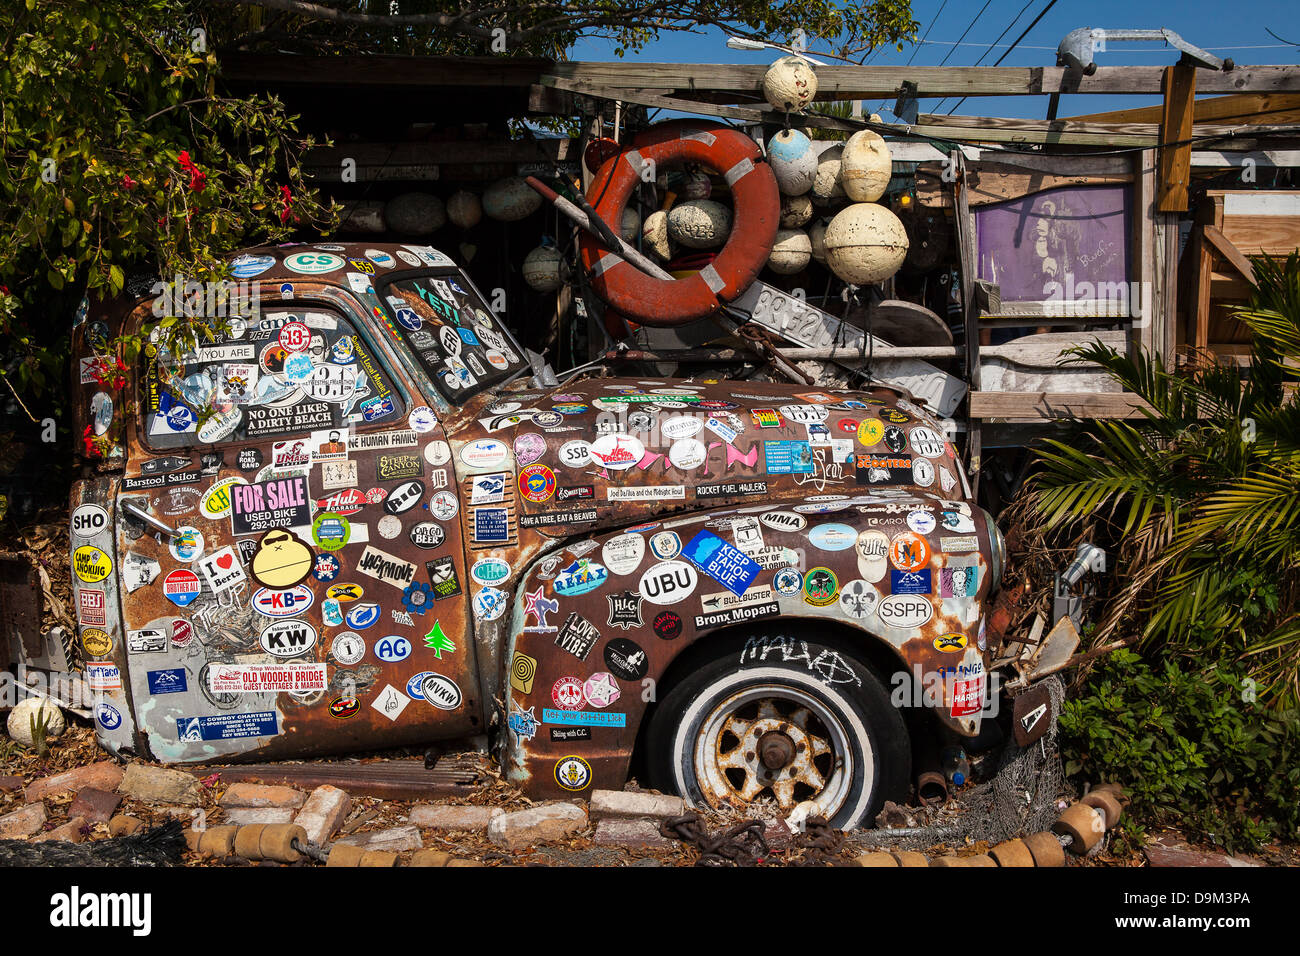 Old Rusted Truck Covered in Stickers, B.O.'s Restaurant, Key West, Florida Stock Photo